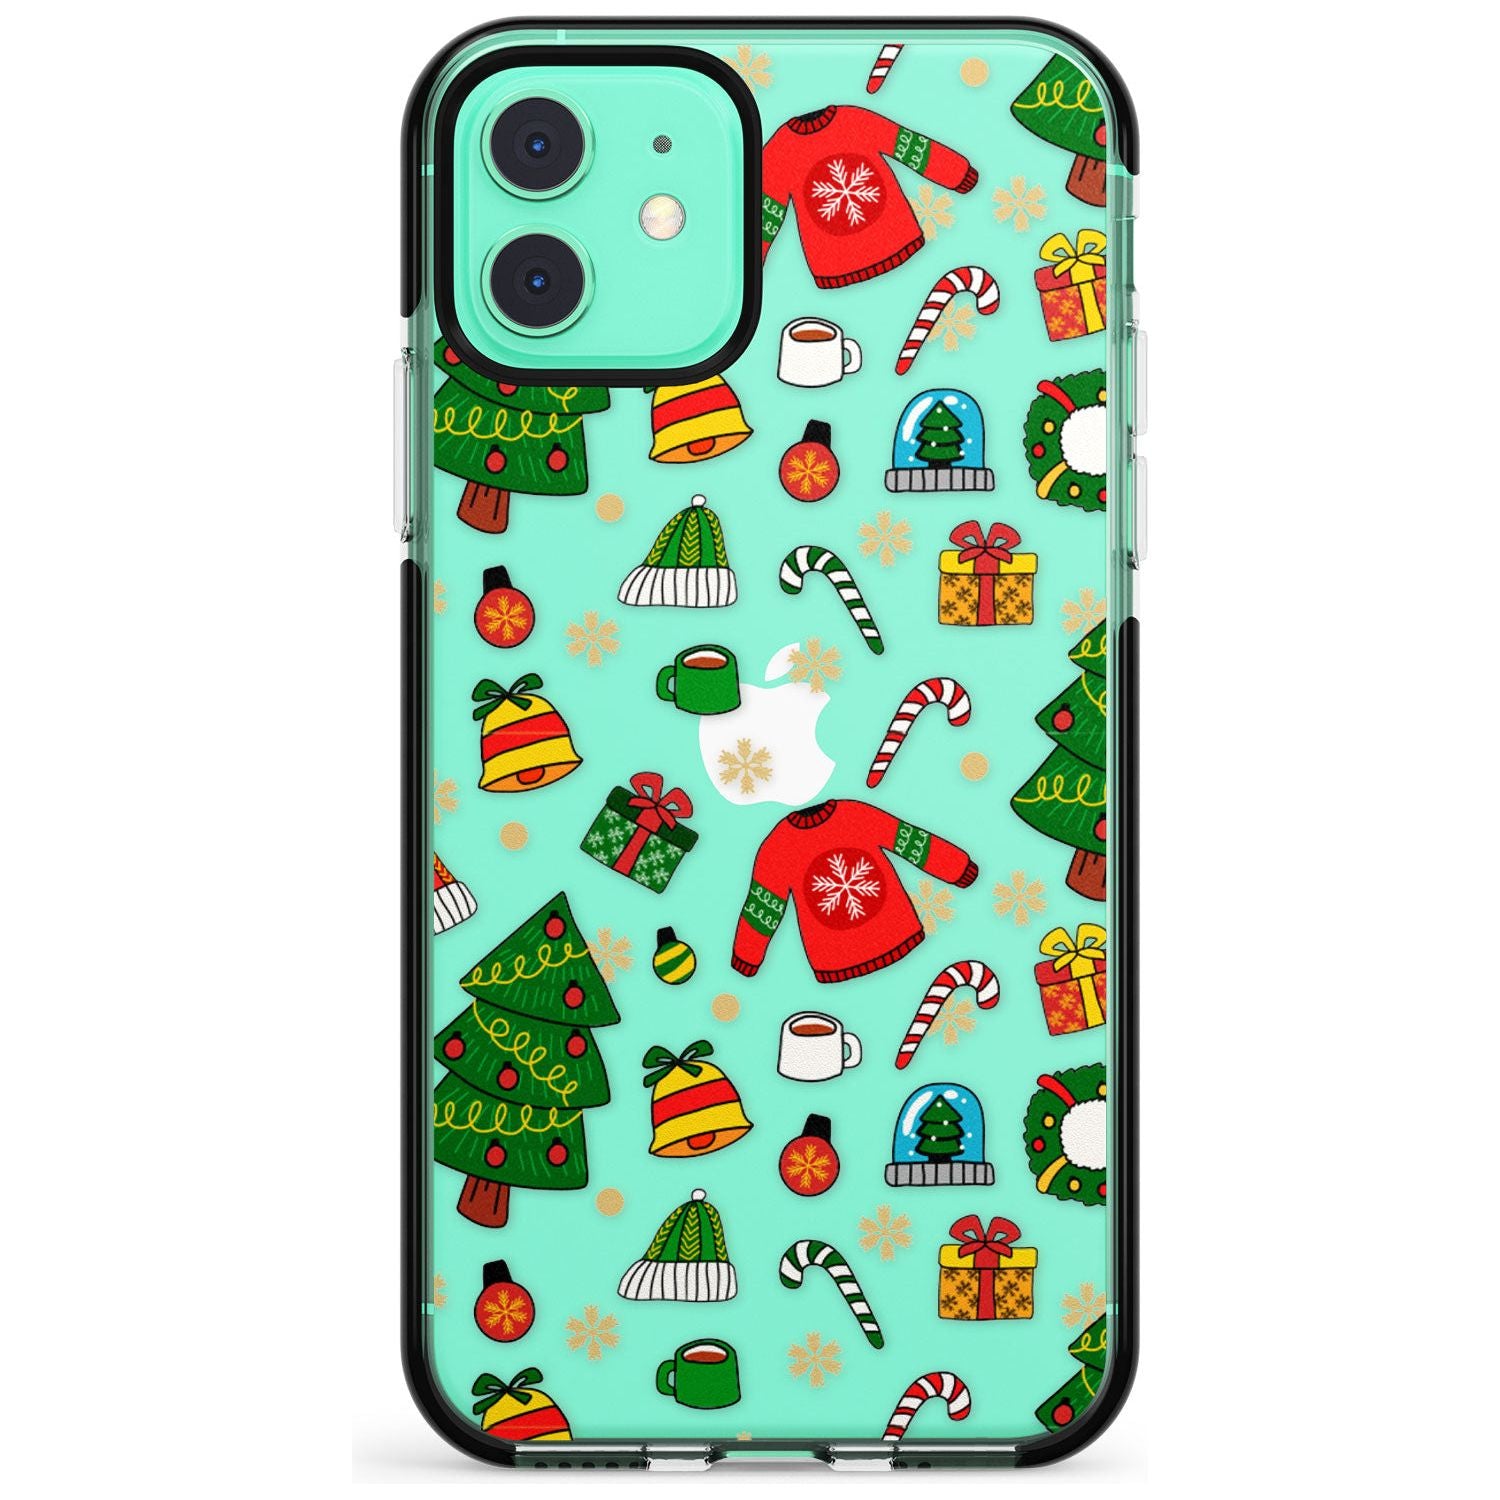 Christmas Mixture Pattern Black Impact Phone Case for iPhone 11 Pro Max